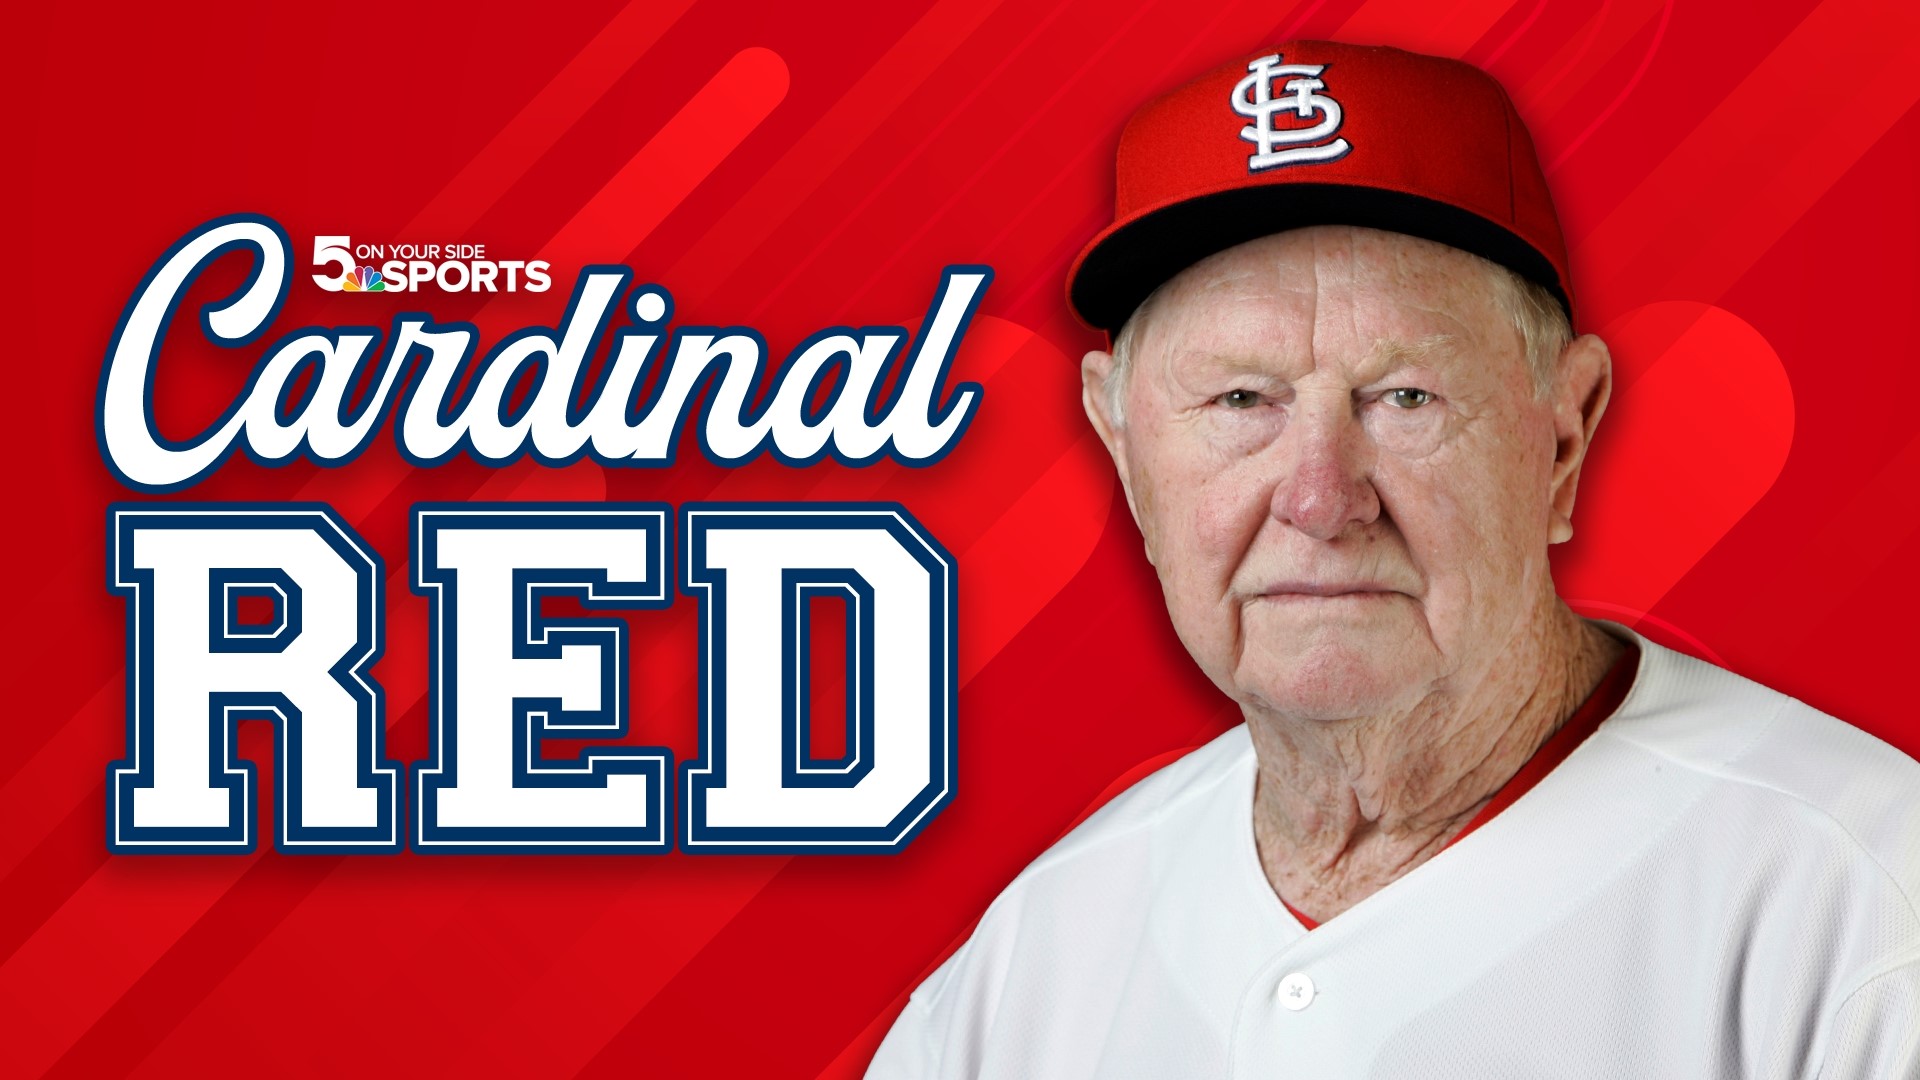 Cardinal Red: A Look at the Career of Red Schoendienst